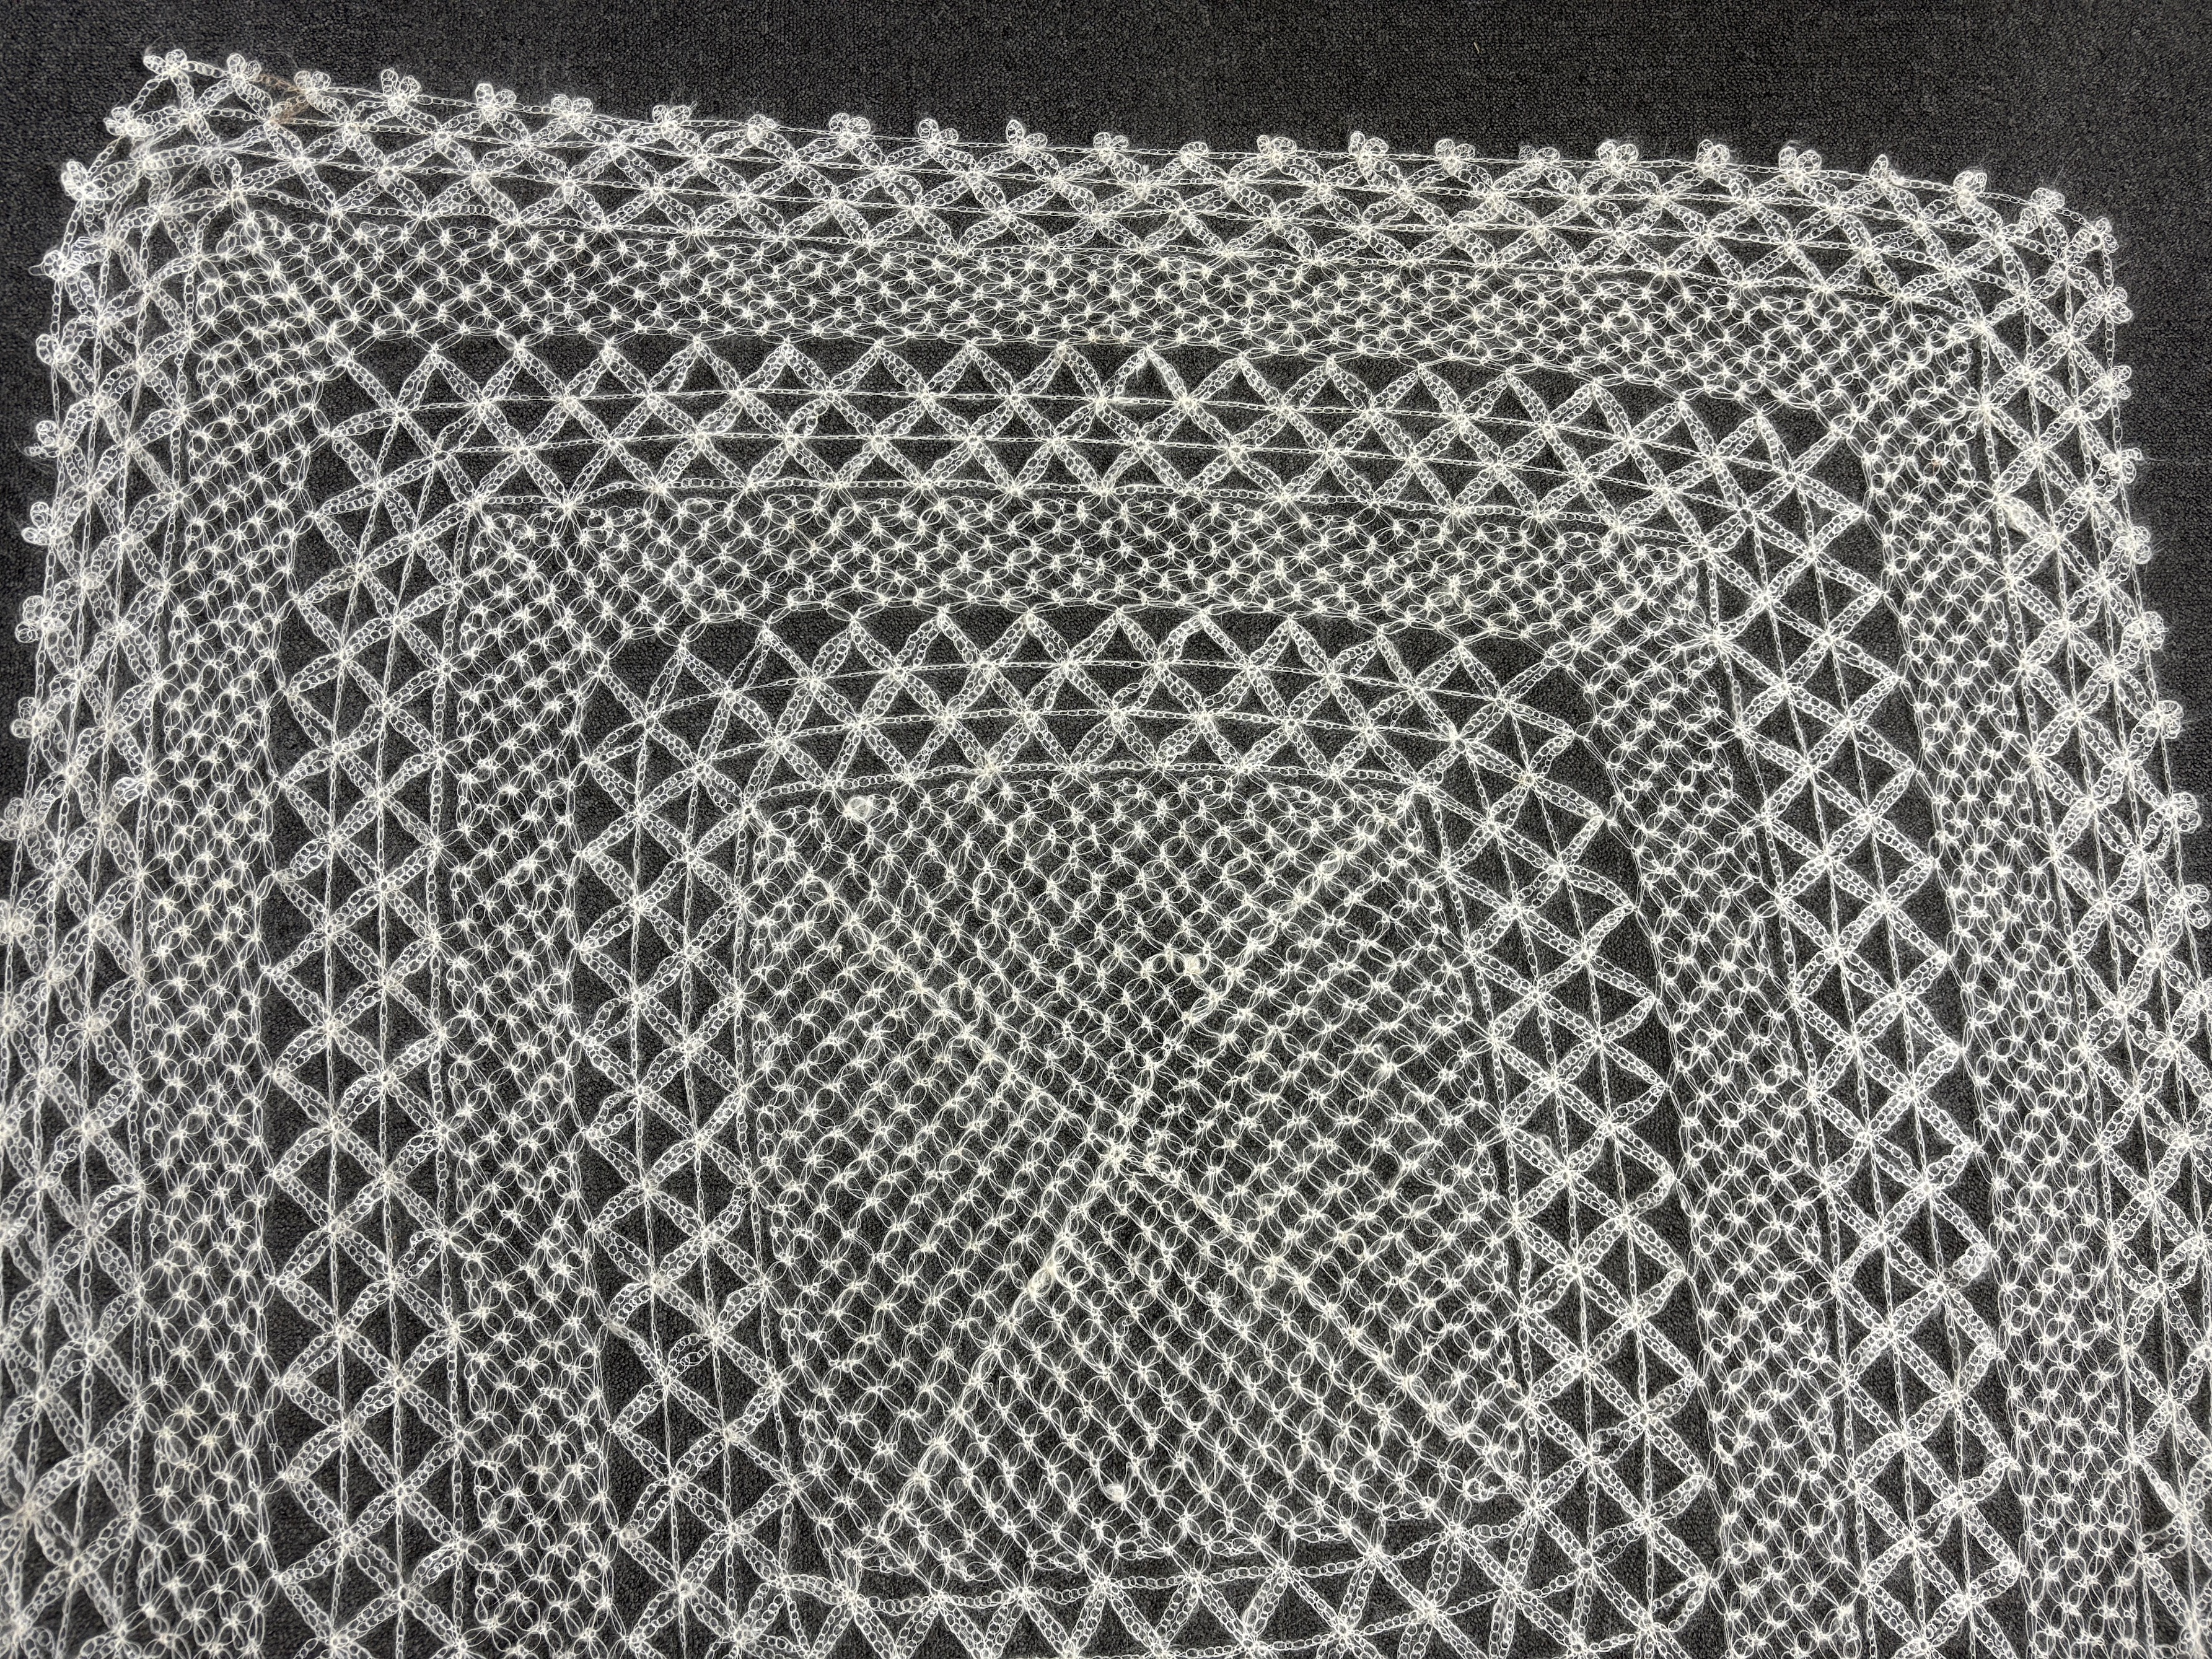 A 20th century central Turkish hand spun and knitted mohair shawl, knitted in an open geometric lace design in cream, 116cm x 120cm